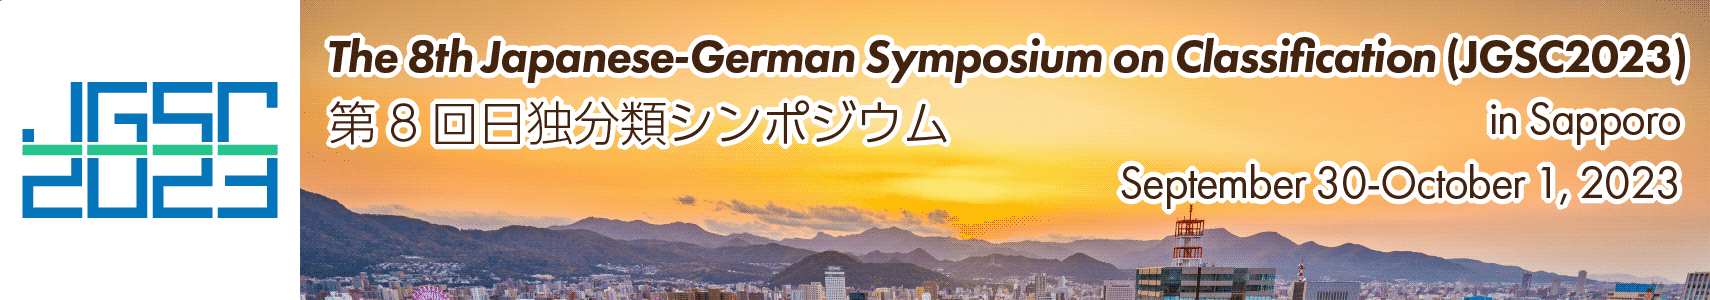 The 8th Japanese-German Symposium on Classification (JGSC2023)